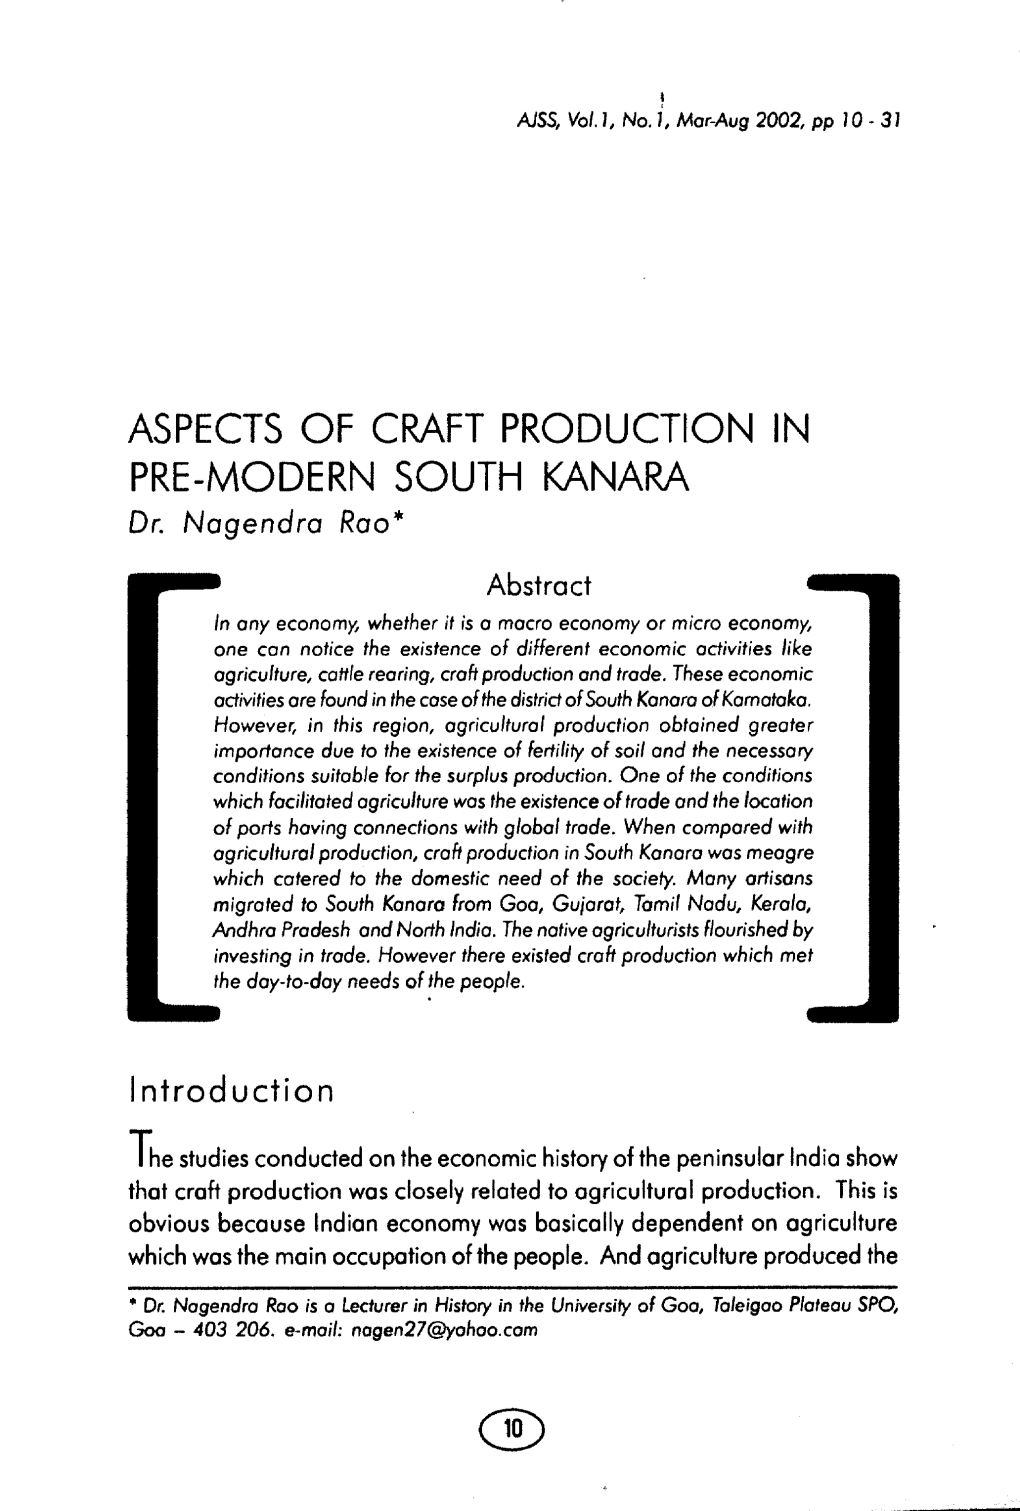 ASPECTS of CRAFT PRODUCTION in PRE-MODERN SOUTH KANARA Dr